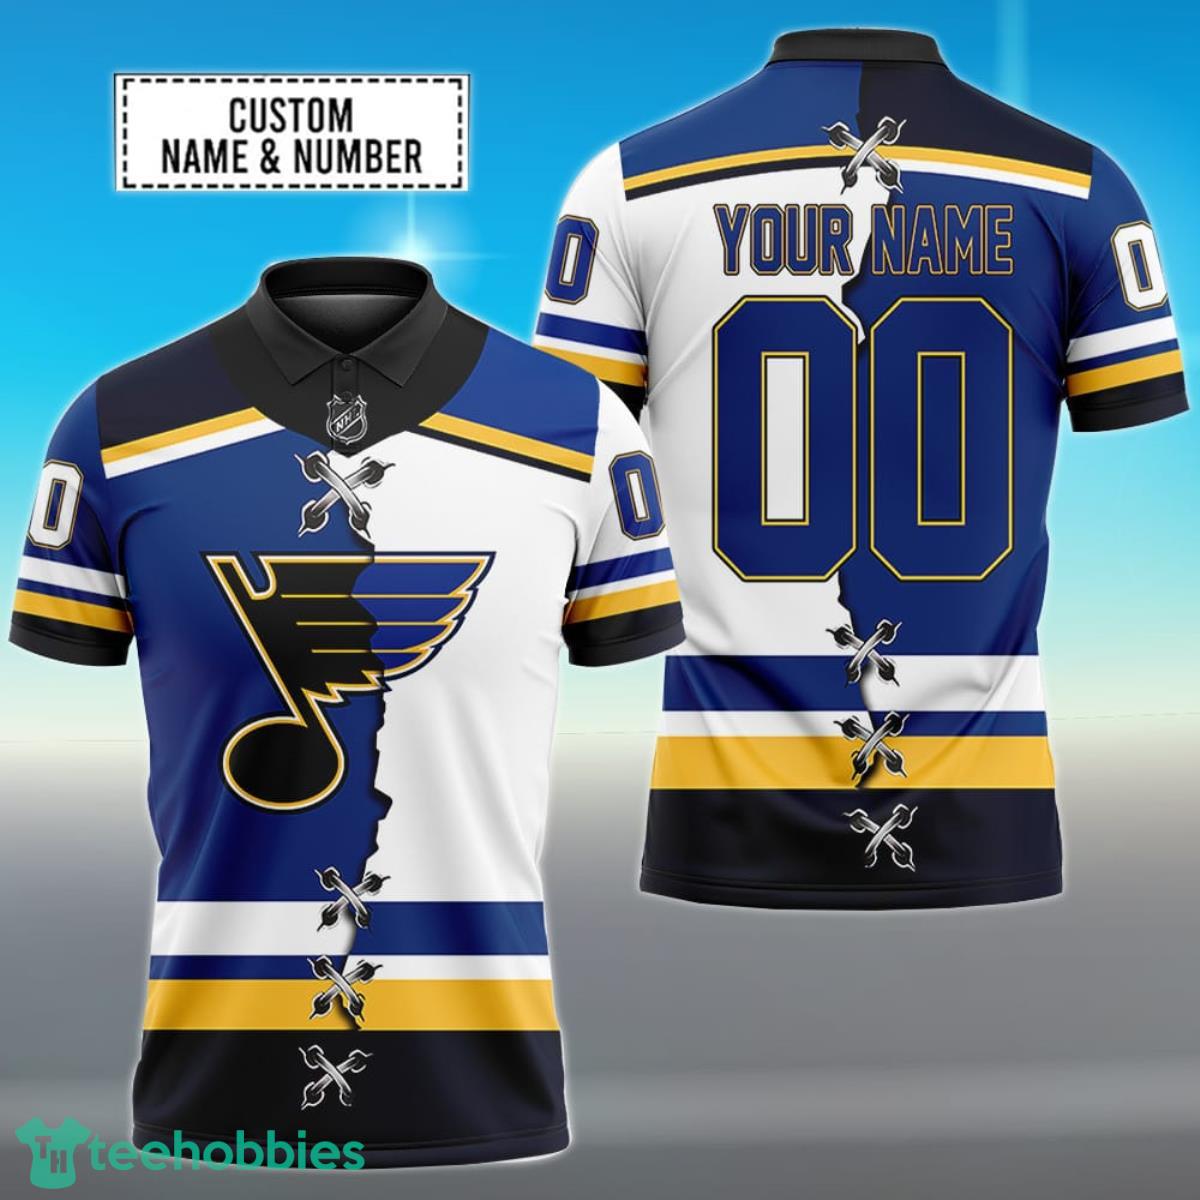 Score Big Style: Discover the Top 10 Polo Shirt Designs for Avid NHL Team  Fans!